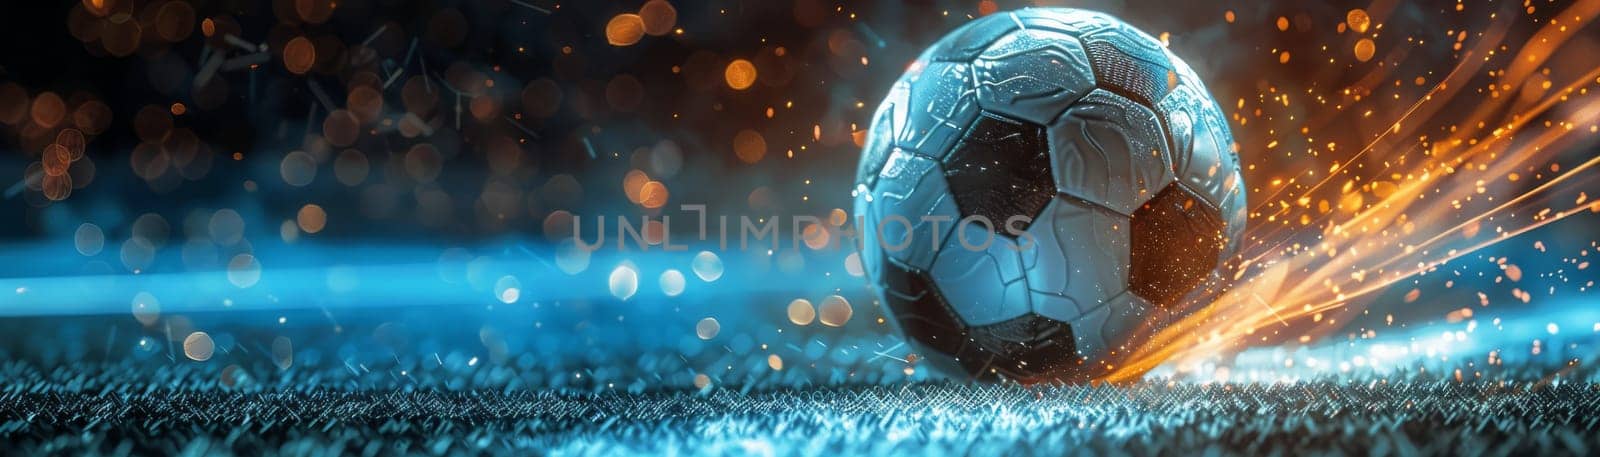 A soccer ball is rolling on a field with fire in the background. Concept of excitement and energy, as if the ball is in the midst of a thrilling game. The fire adds a dramatic element to the scene